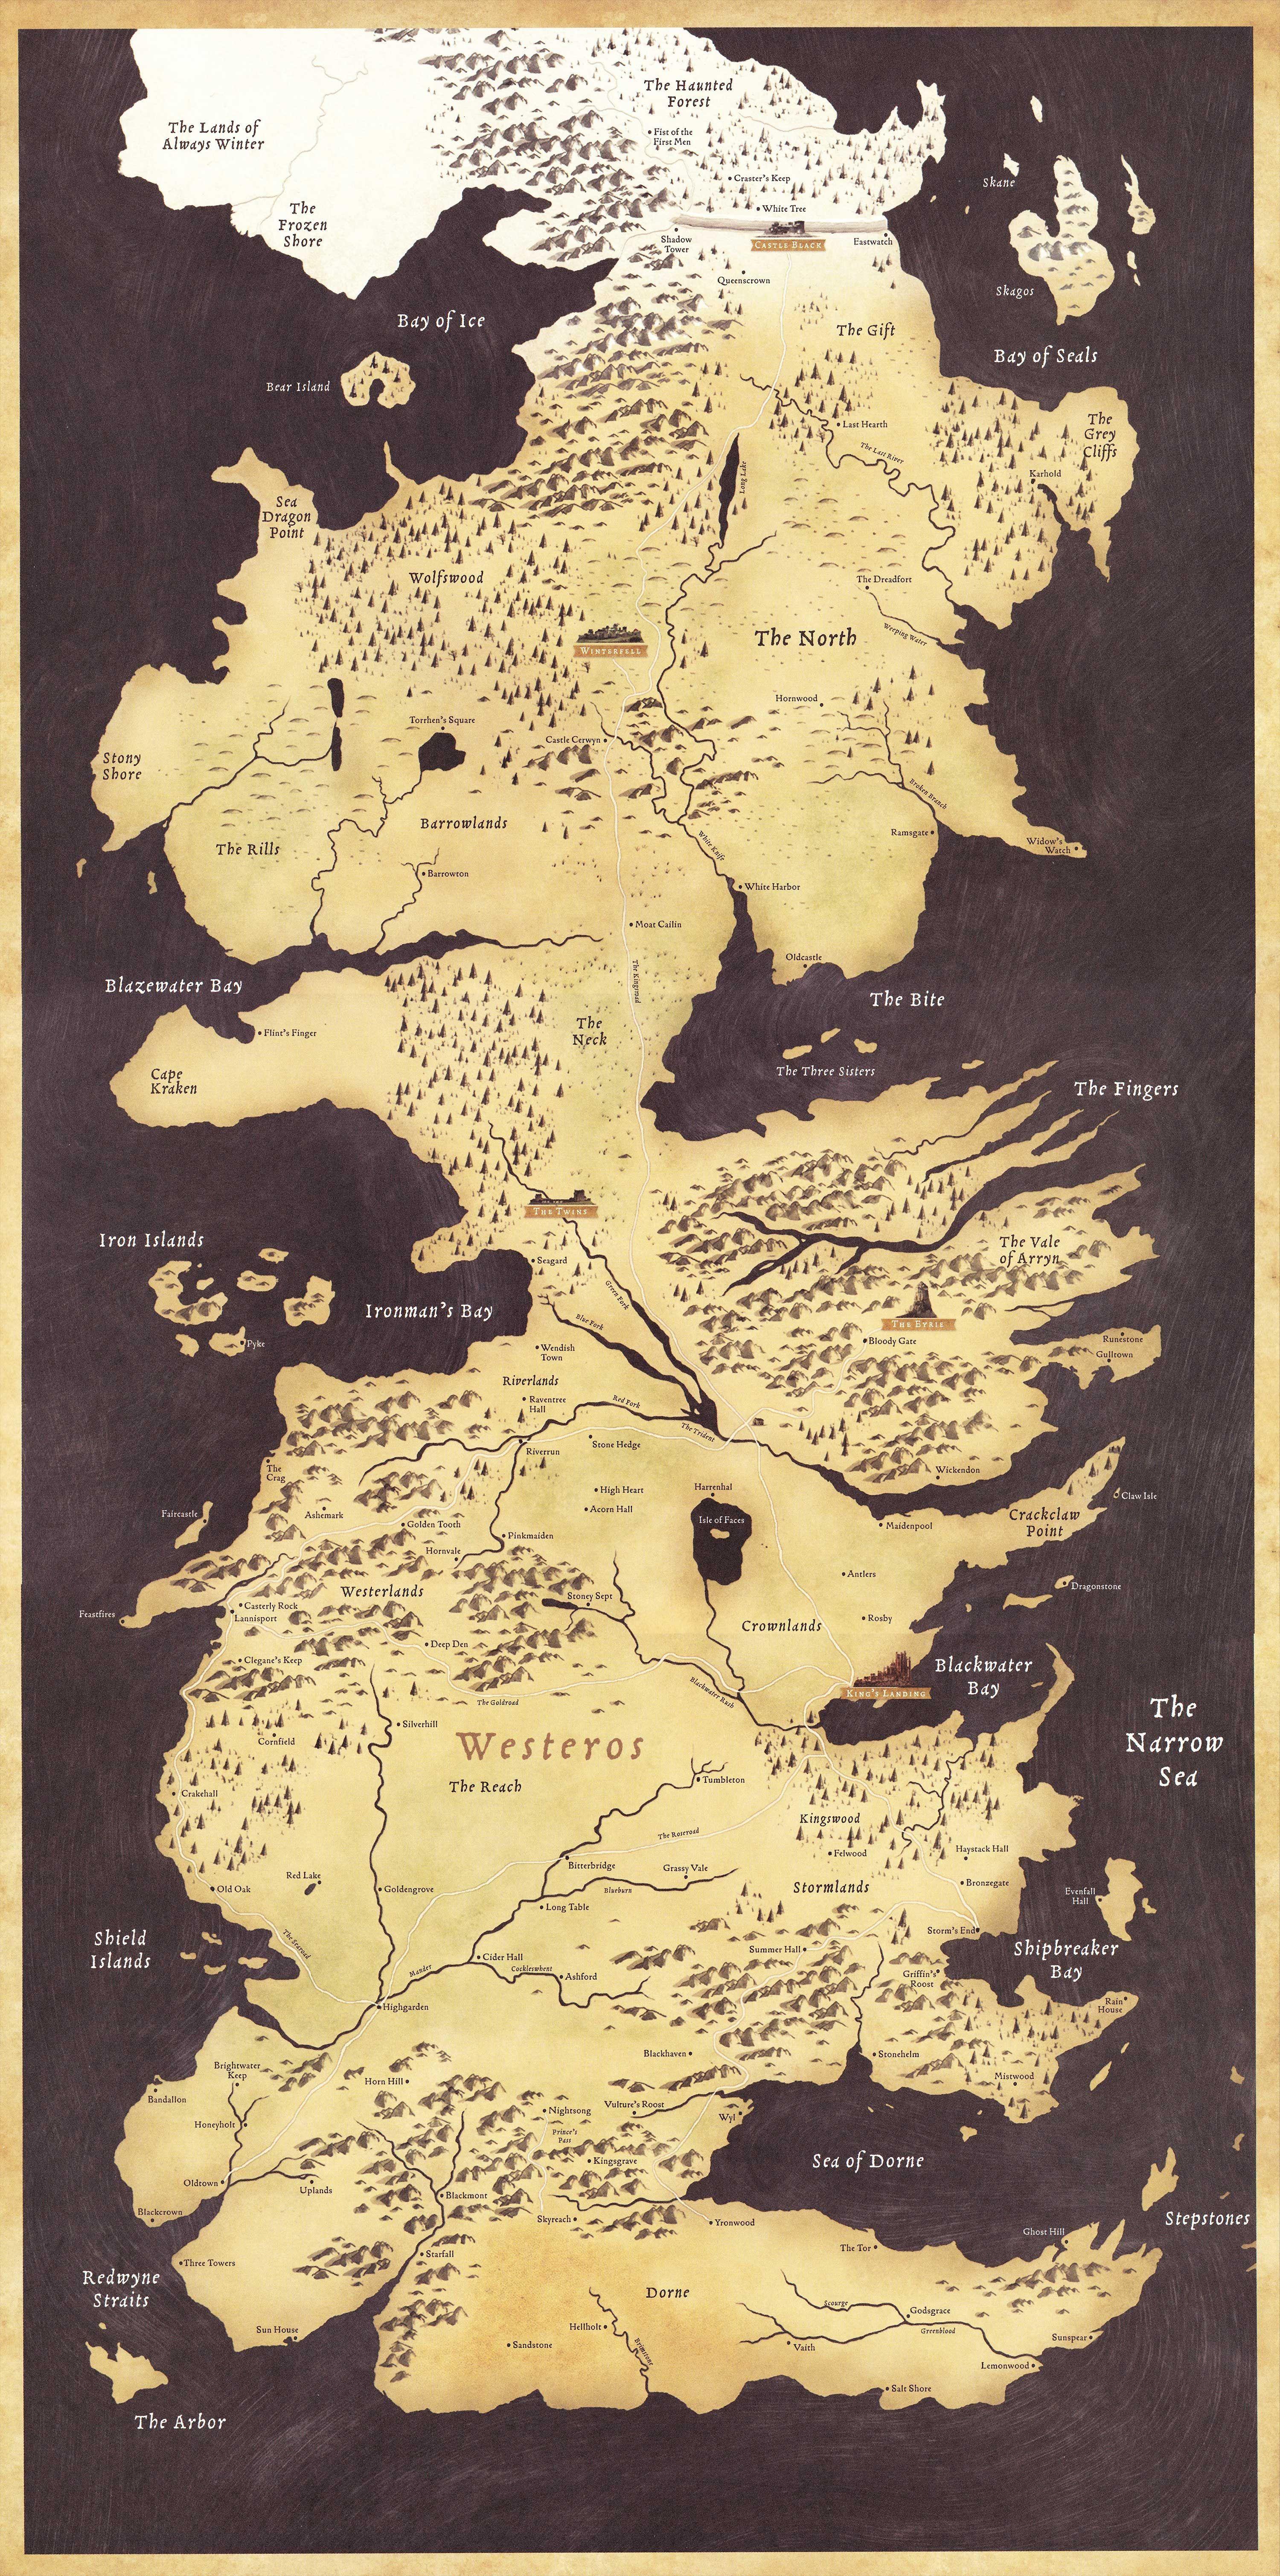 Inspirational Game Of Thrones World Map Wallpaper